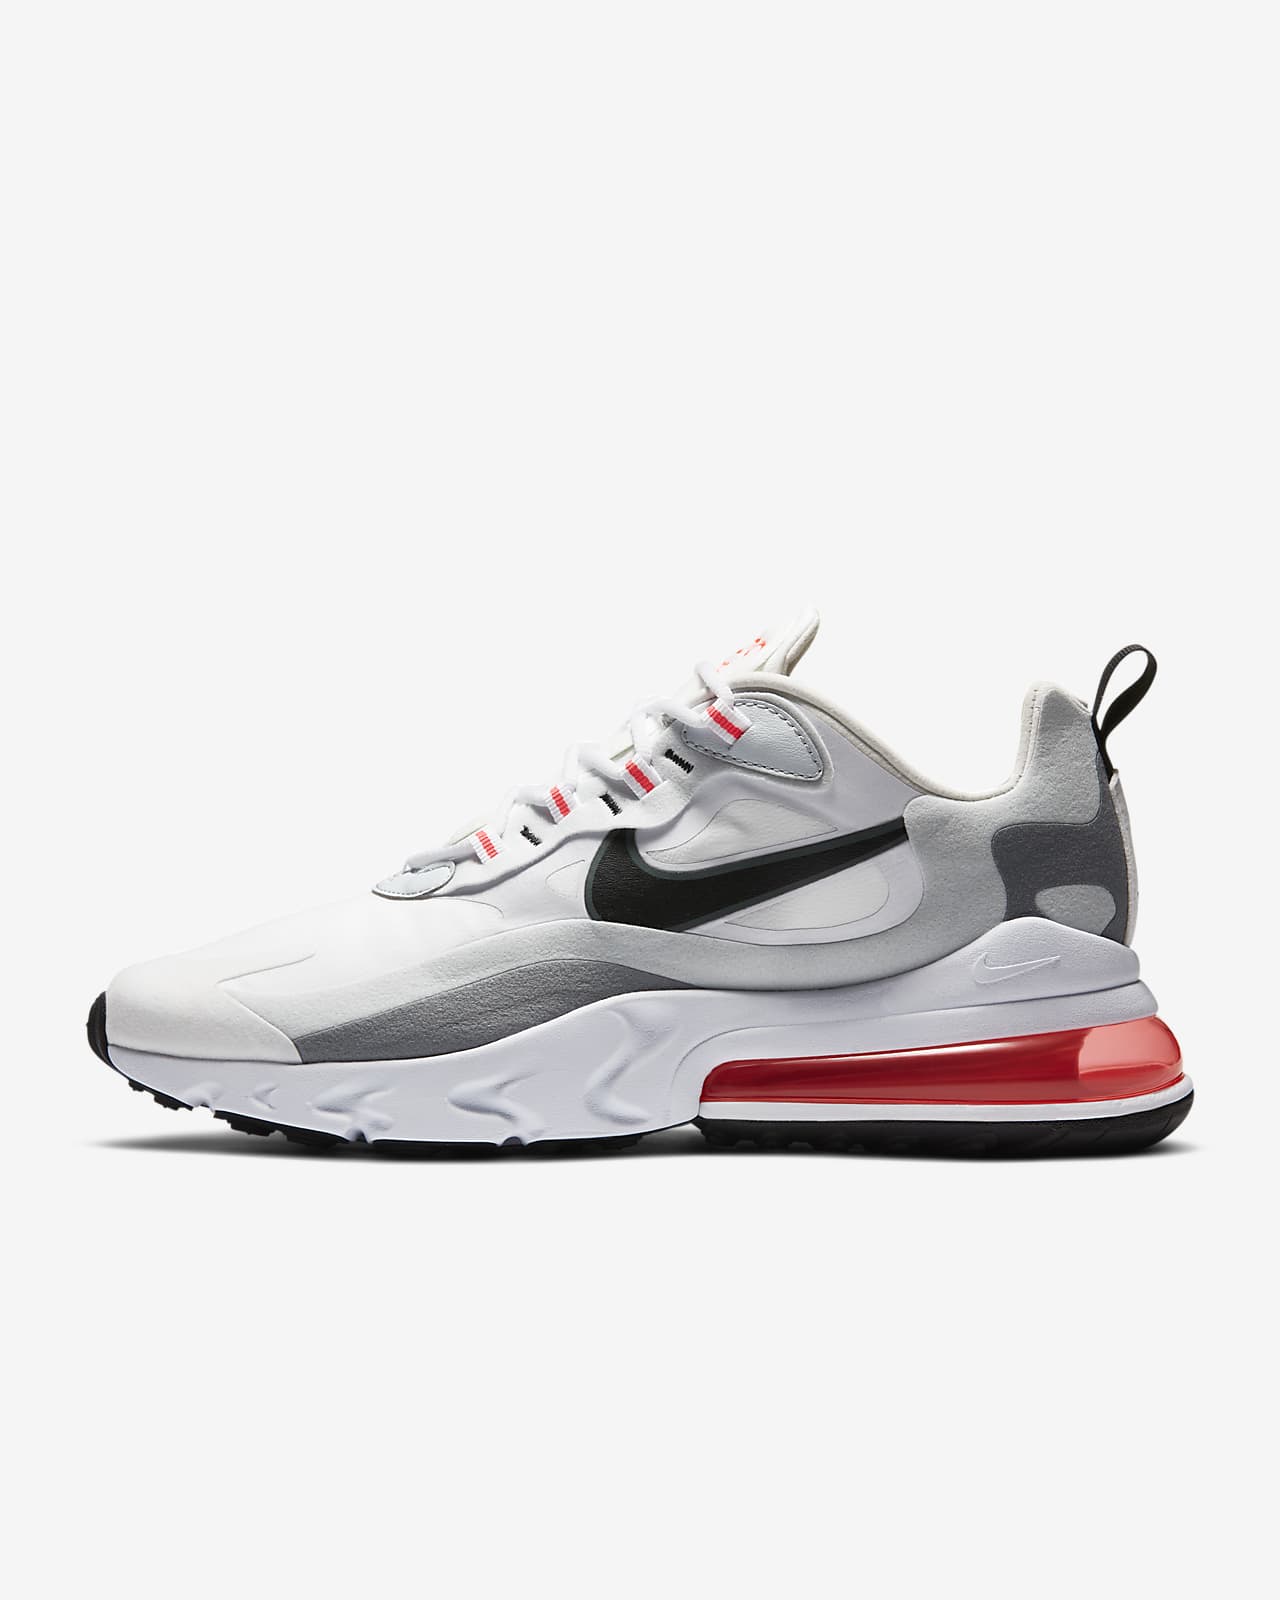 white and gray air max 270